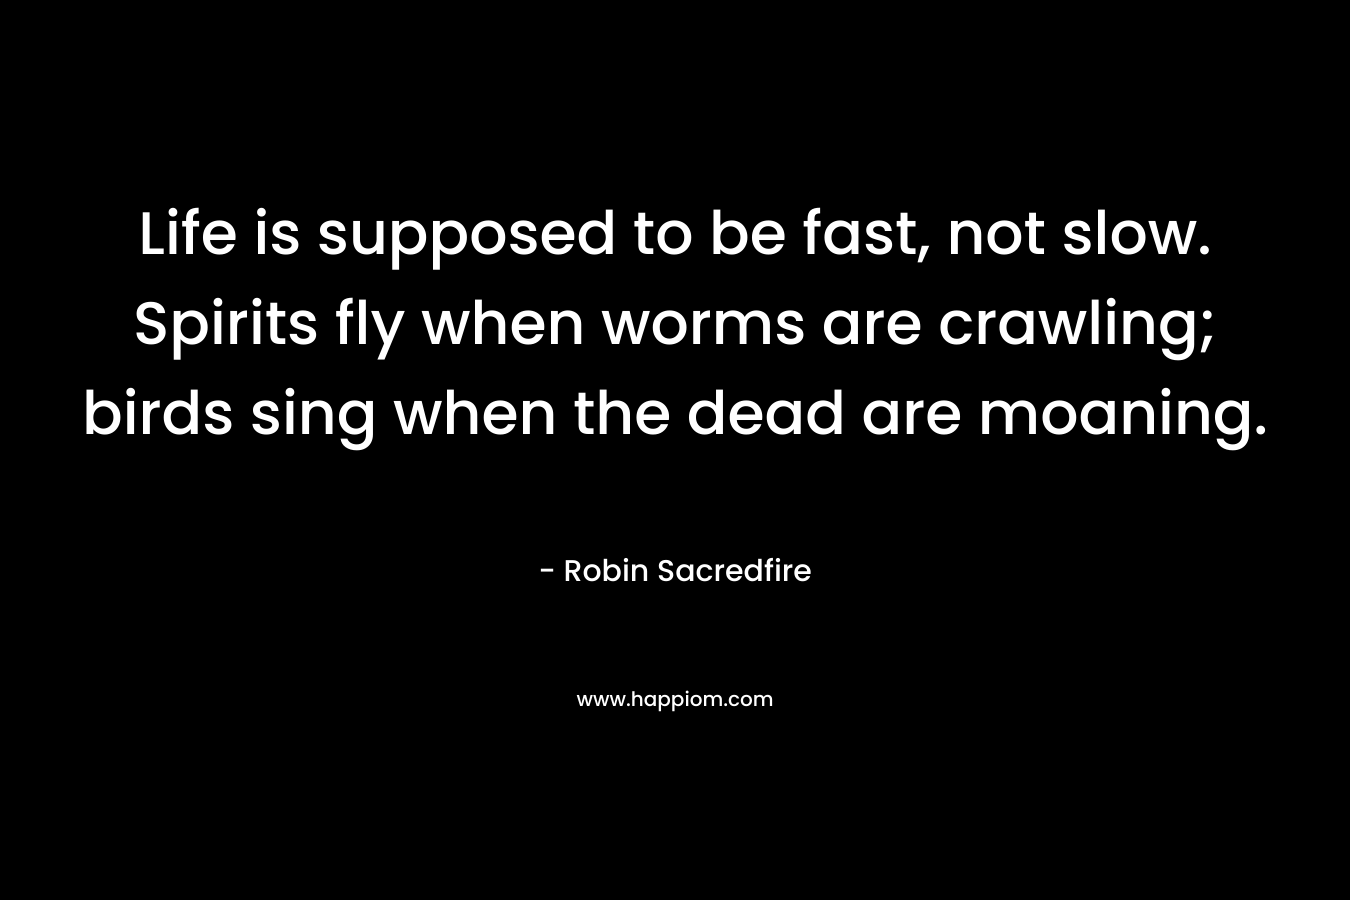 Life is supposed to be fast, not slow. Spirits fly when worms are crawling; birds sing when the dead are moaning.